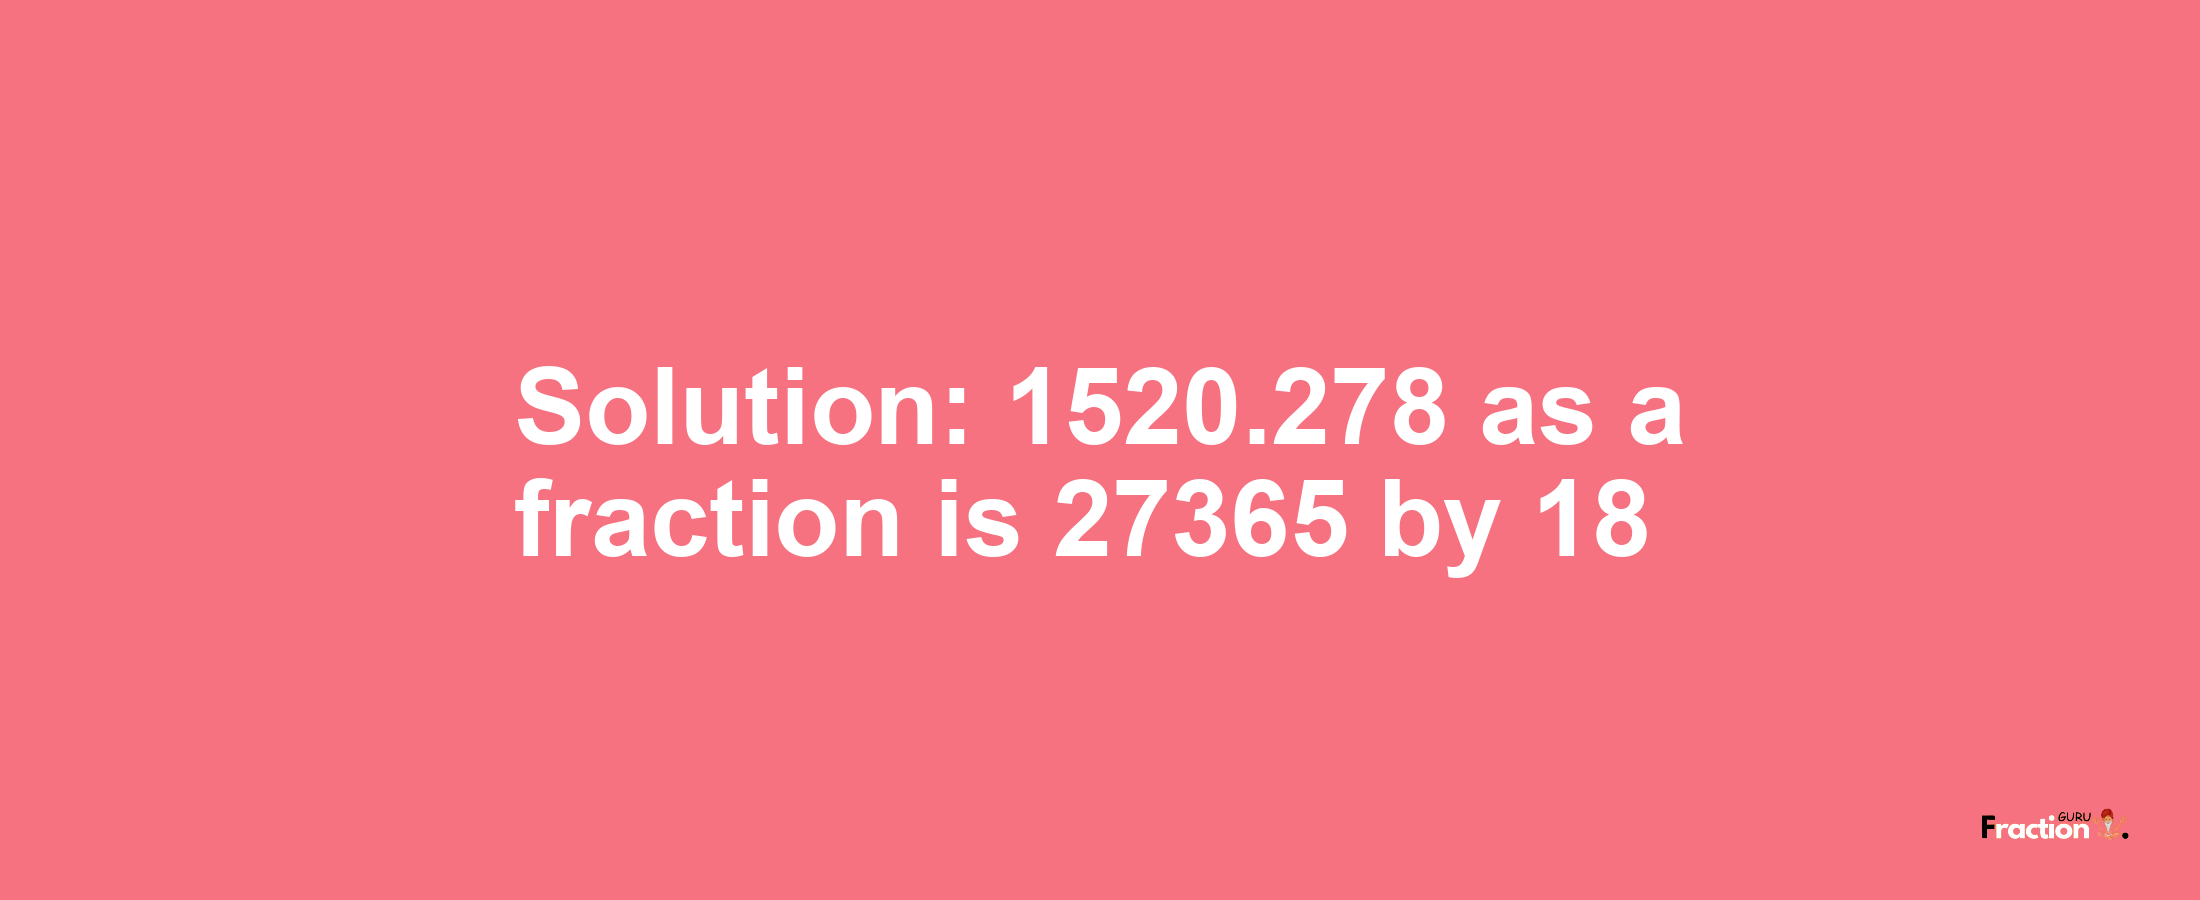 Solution:1520.278 as a fraction is 27365/18